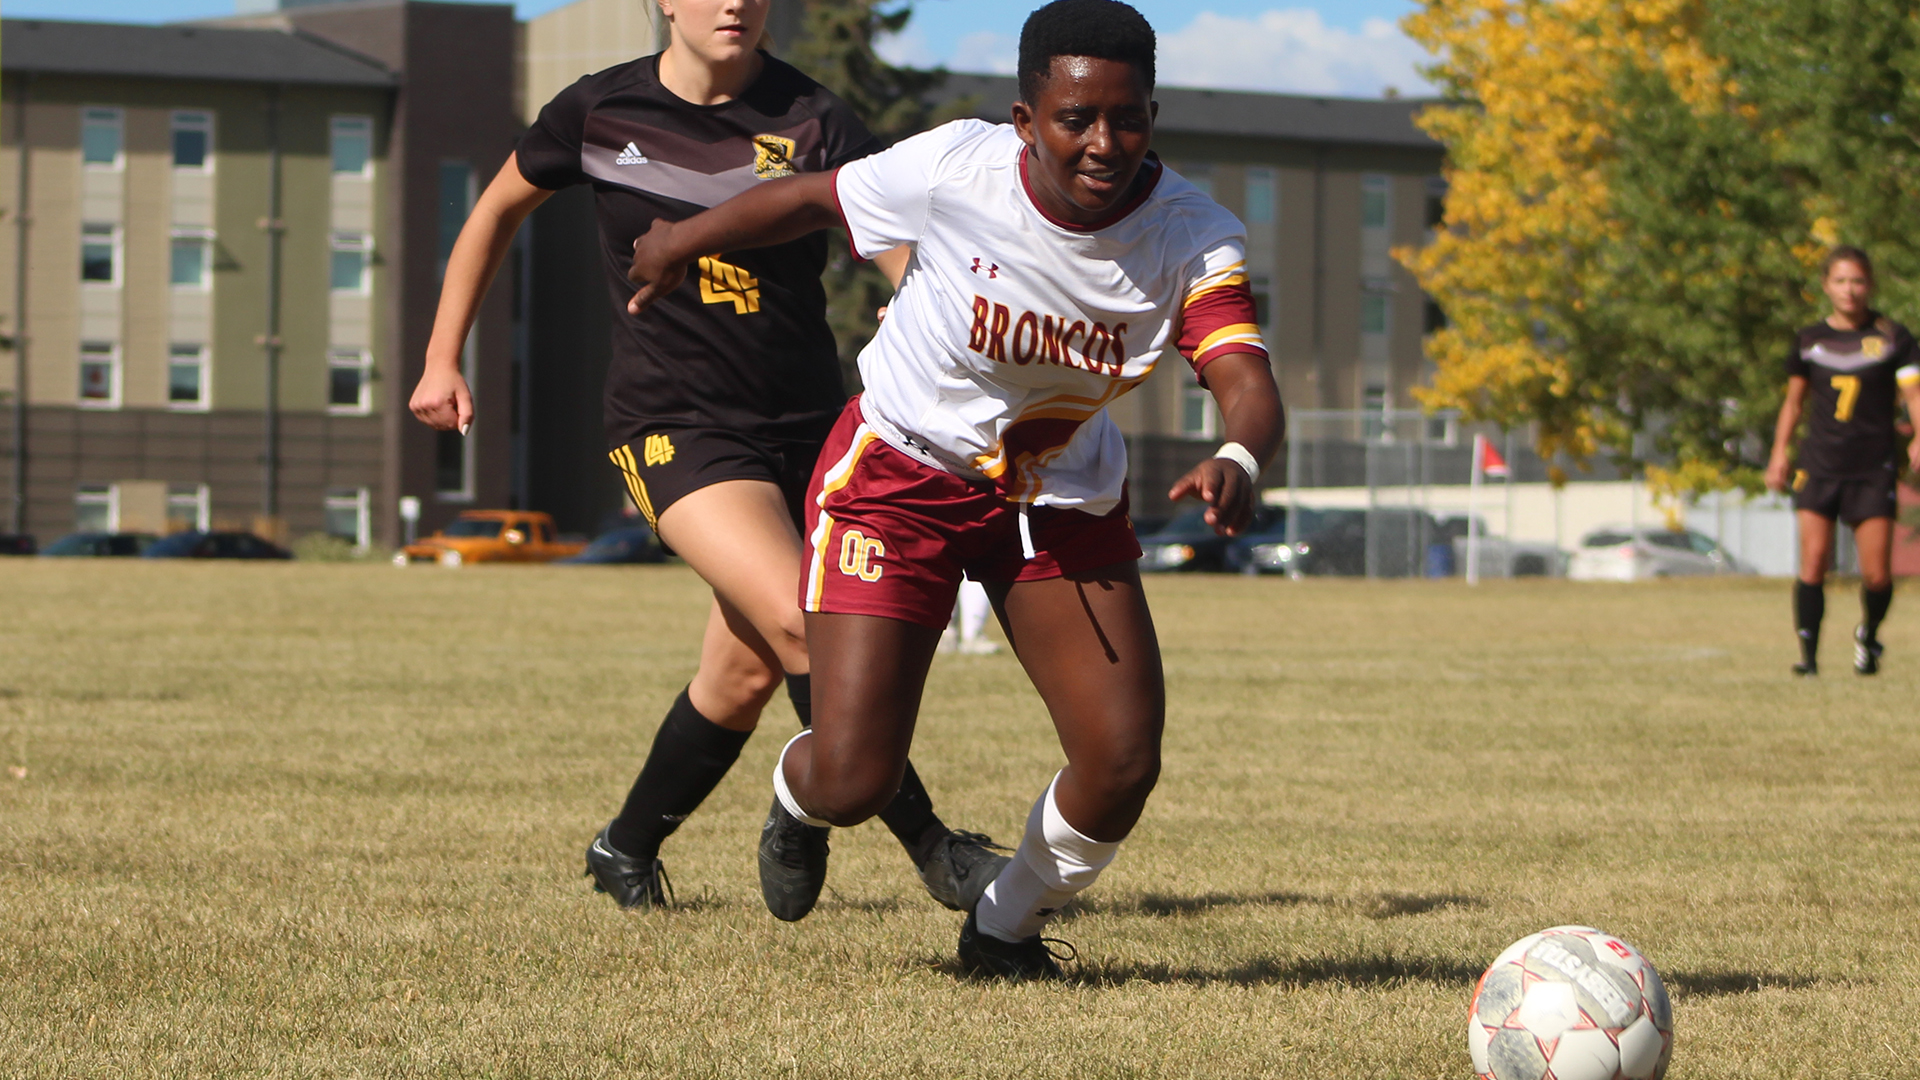 WSOC: Broncos ready for pair of key matchups